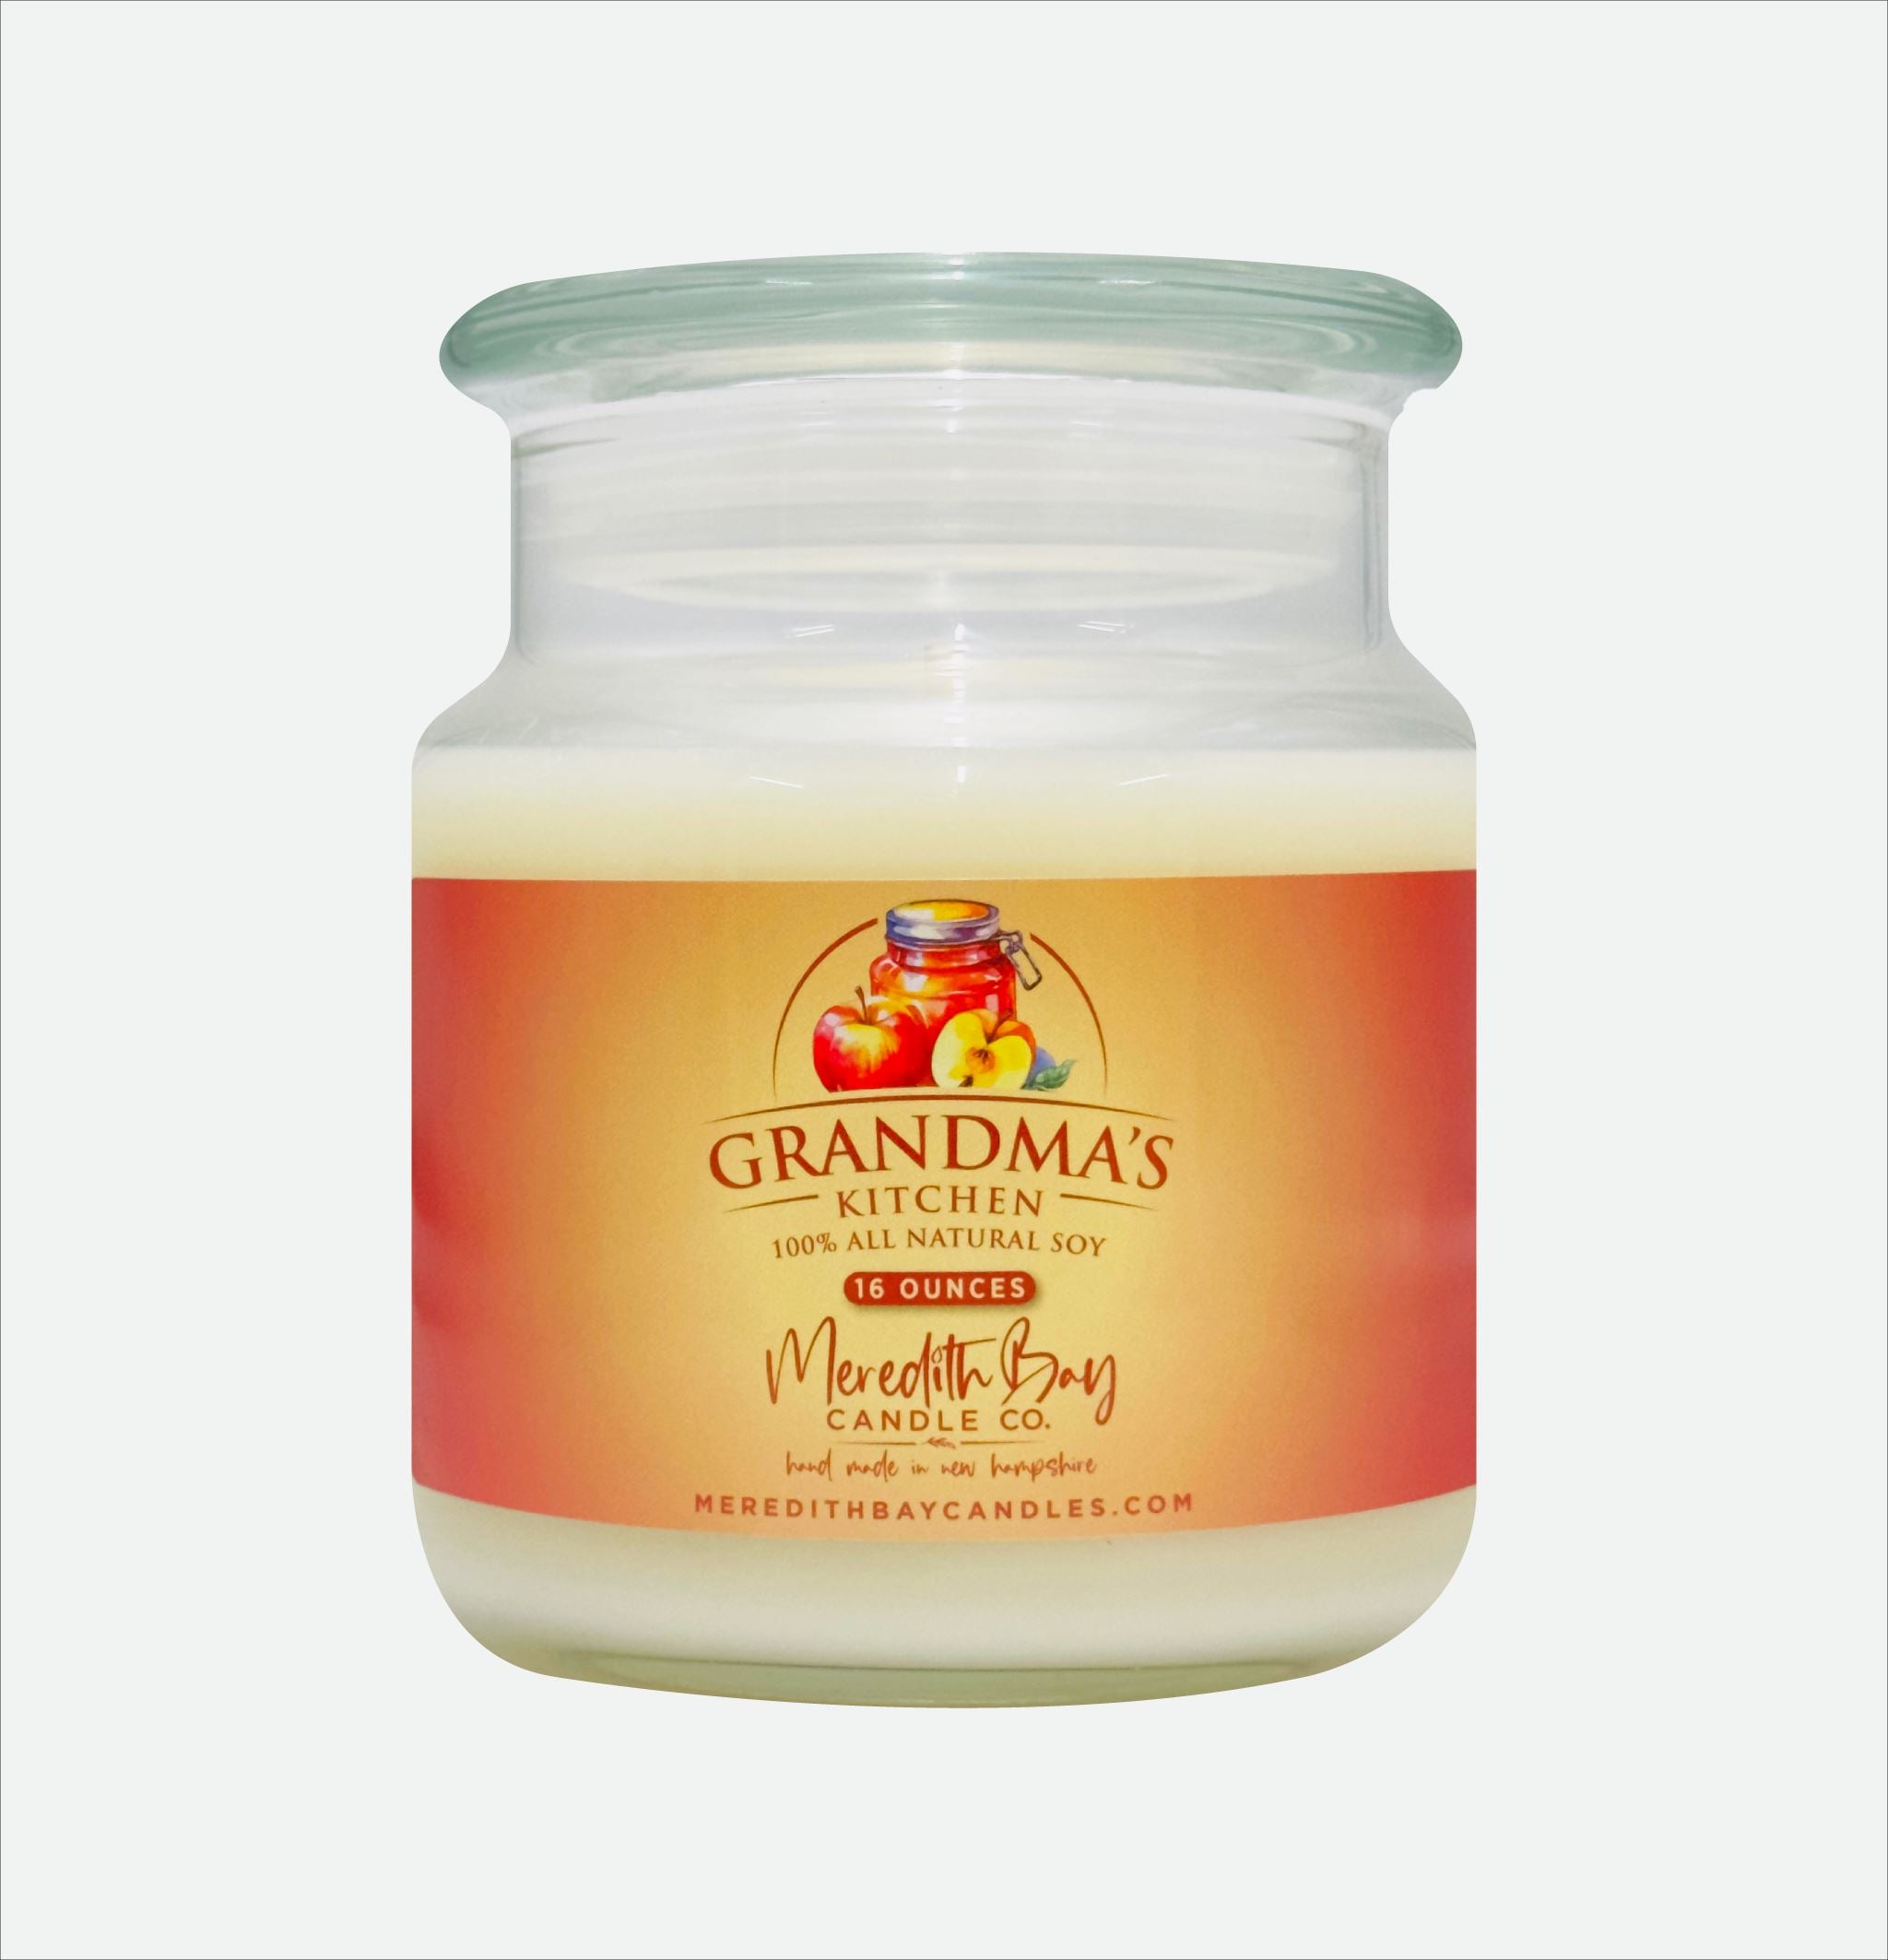 Grandma's Kitchen Soy Candle Meredith Bay Candle Co 16 Oz 